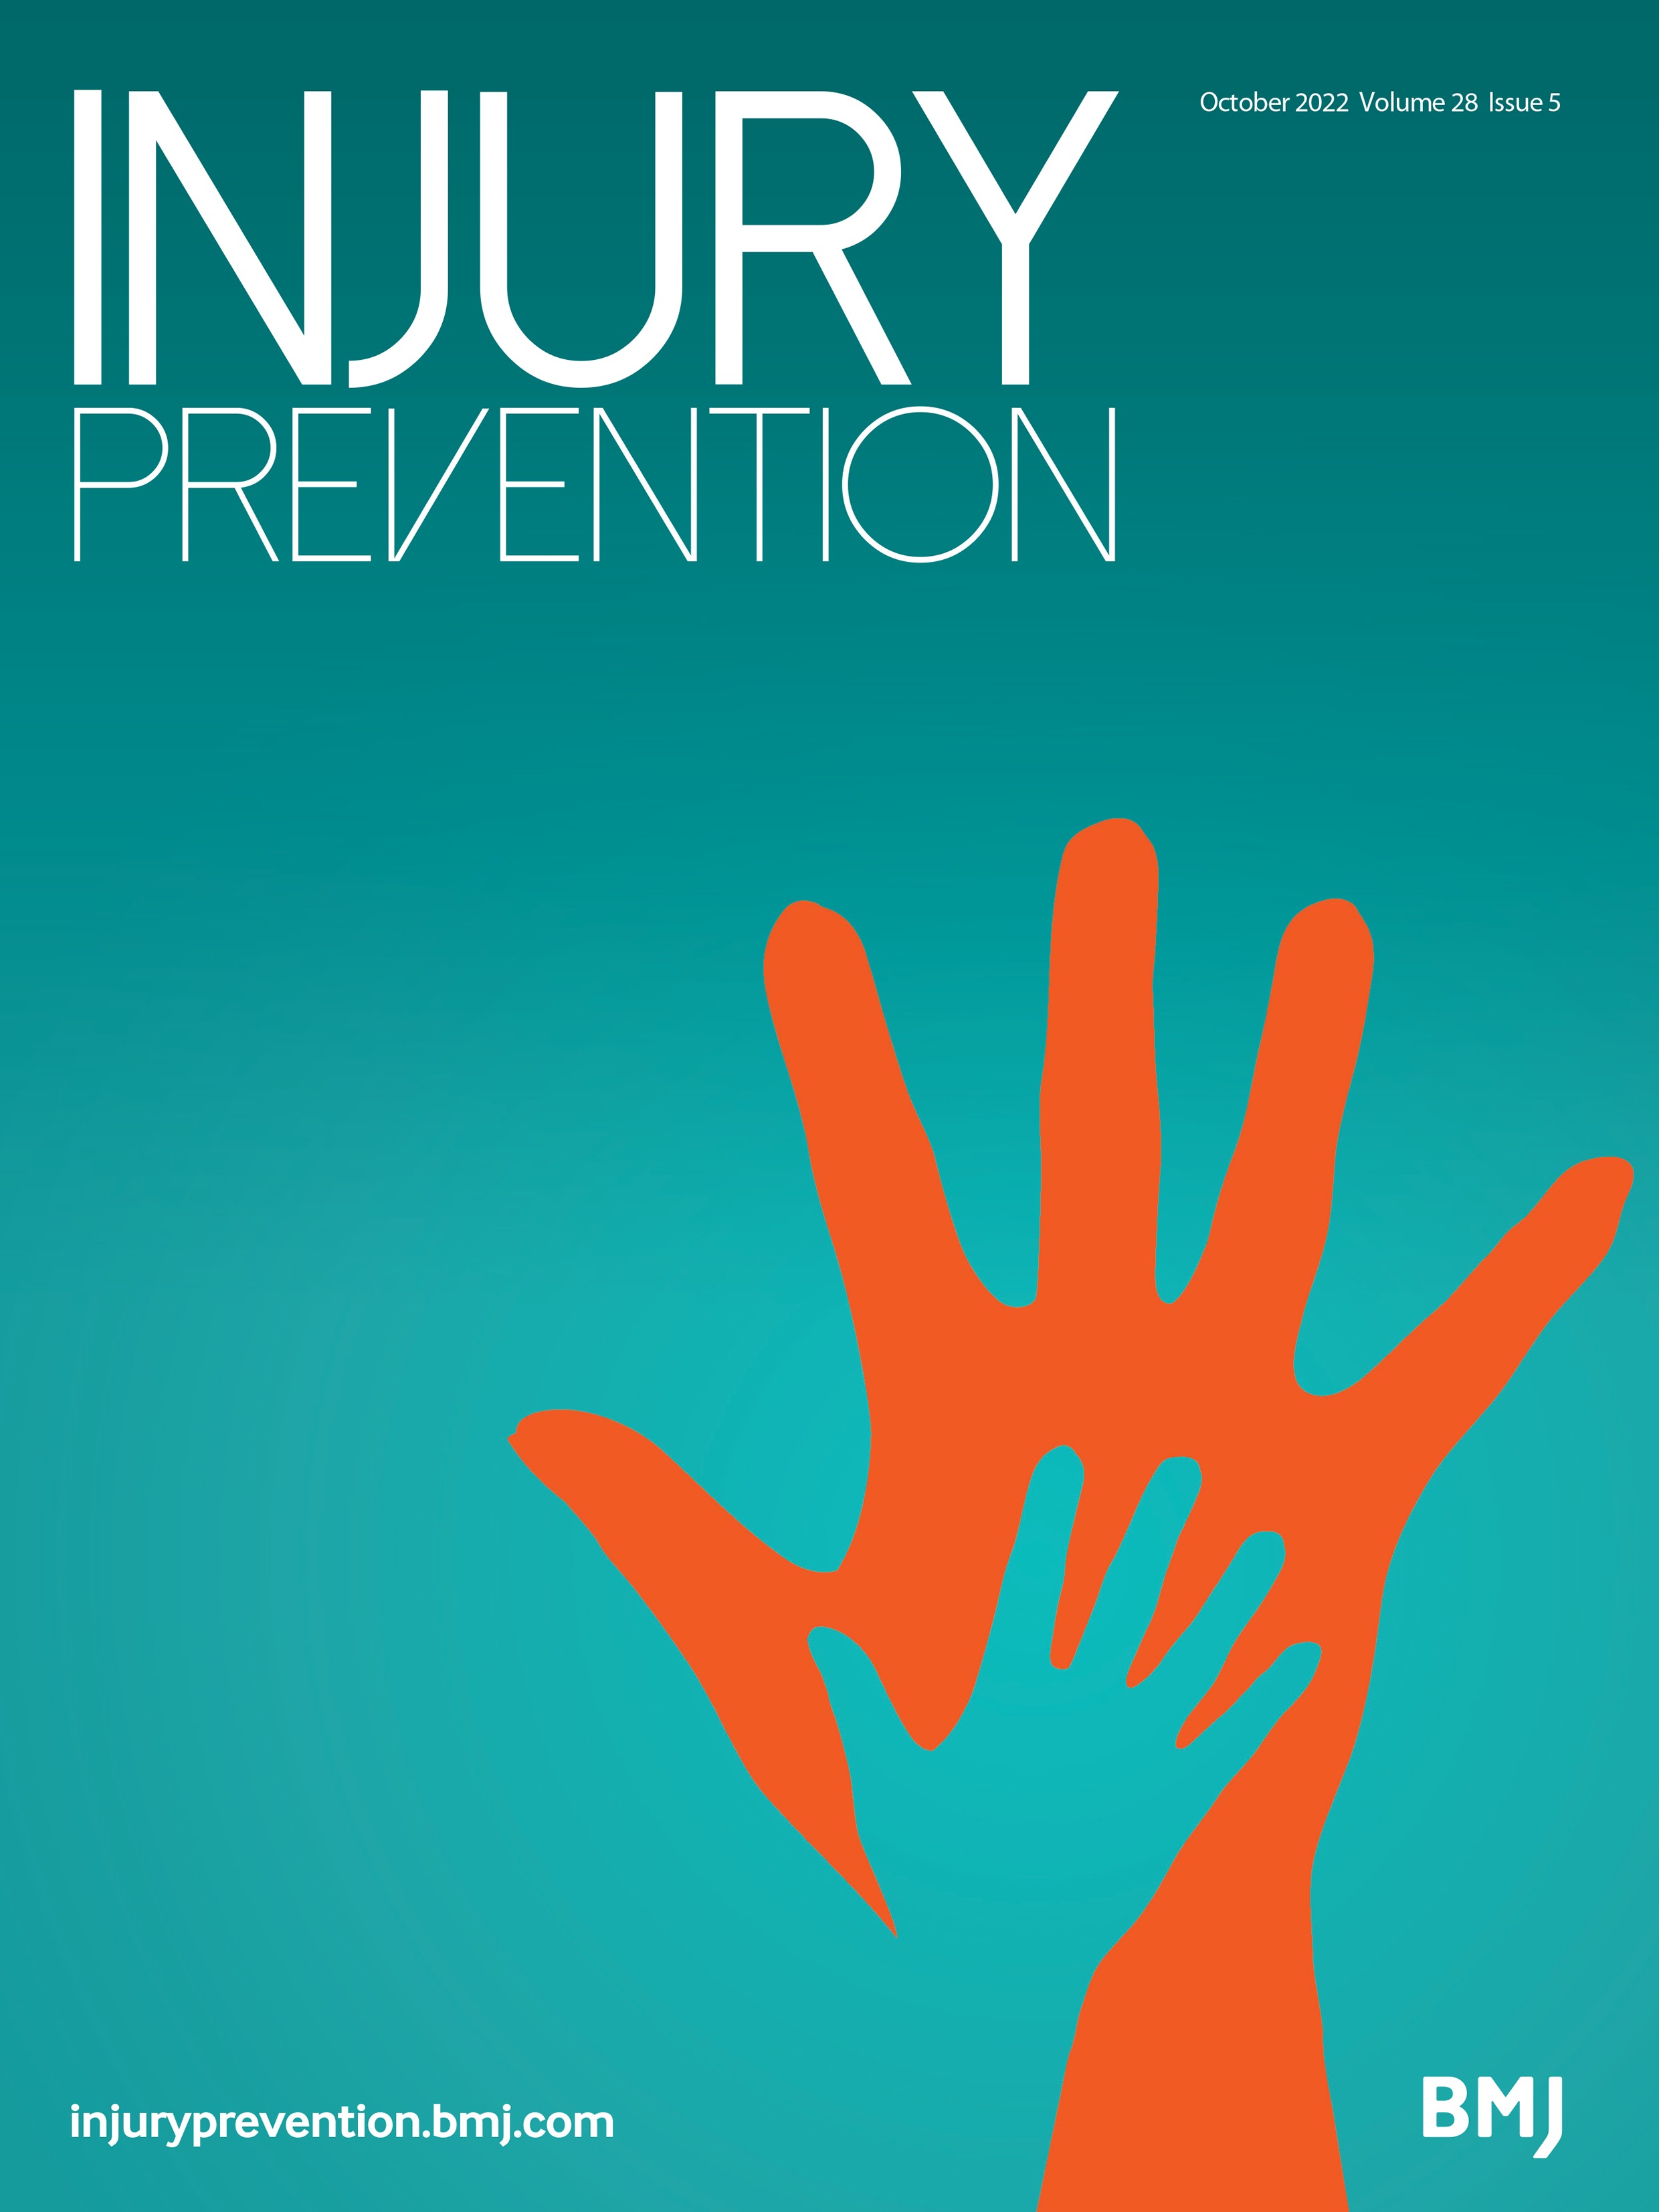 Innovations in suicide prevention research (INSPIRE): a protocol for a population-based case-control study